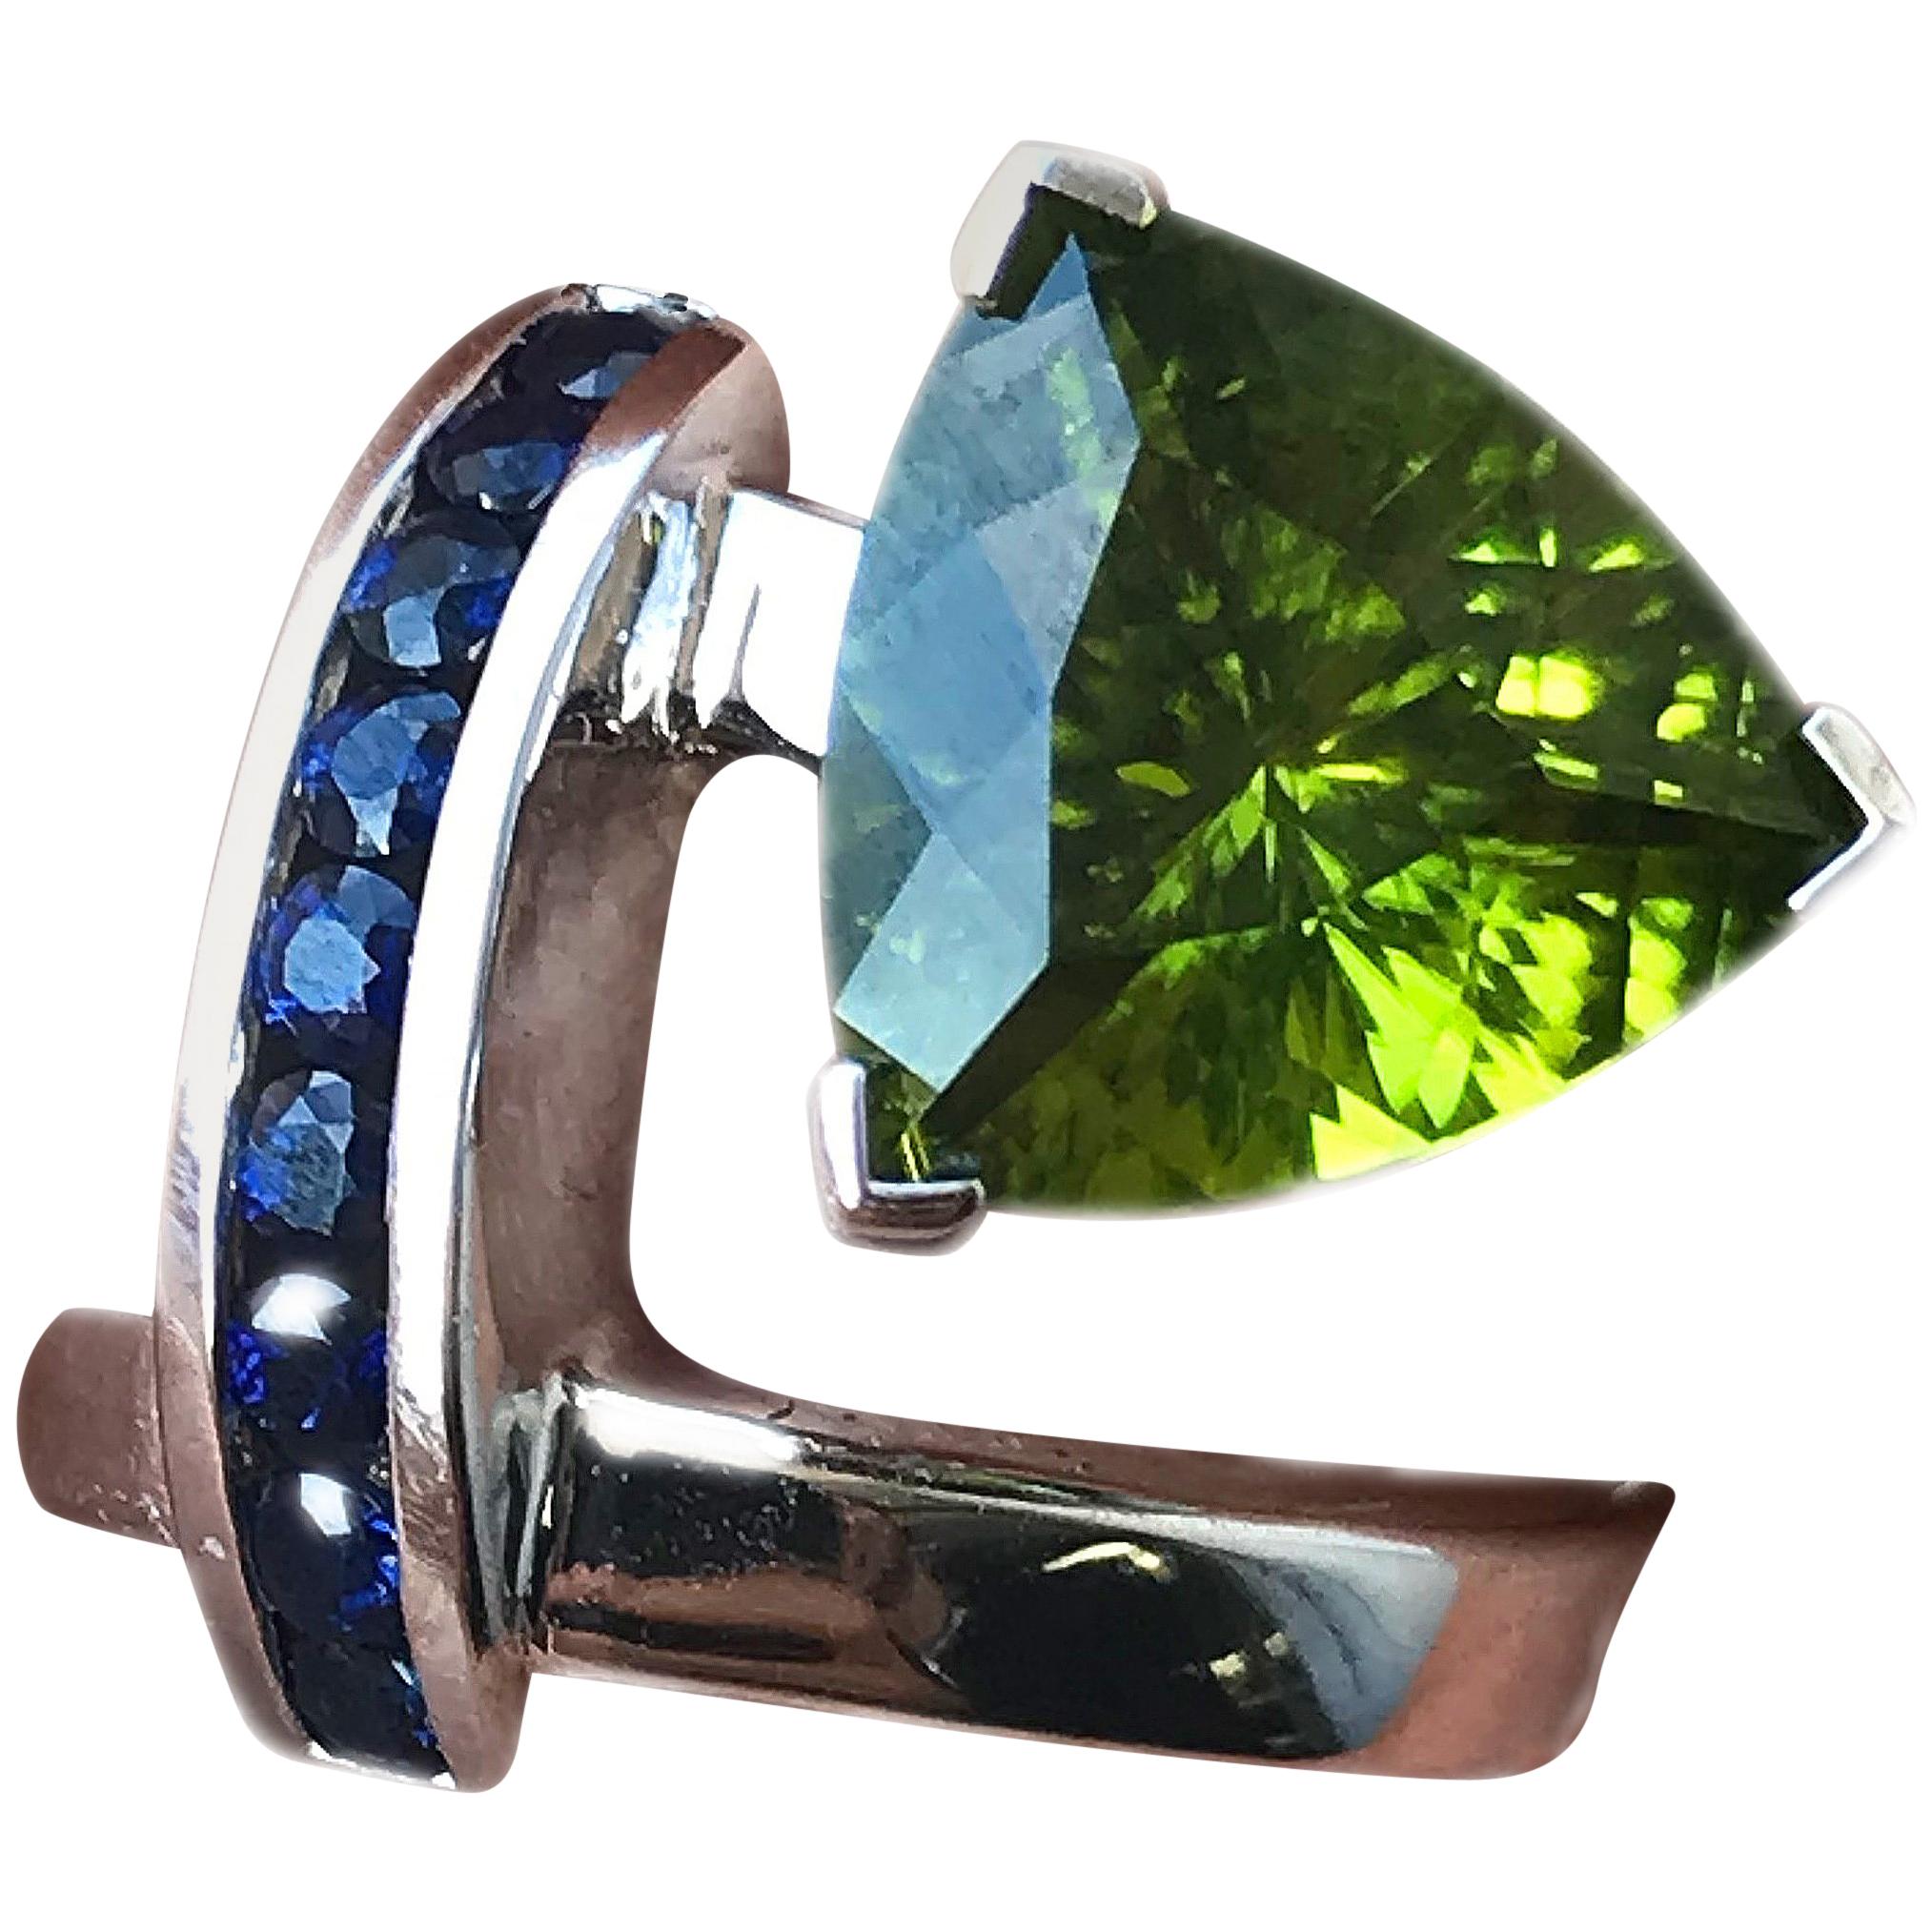 5 Carat TW Approximate Trillion Peridot and Blue Sapphire Ring, Ben Dannie im Angebot